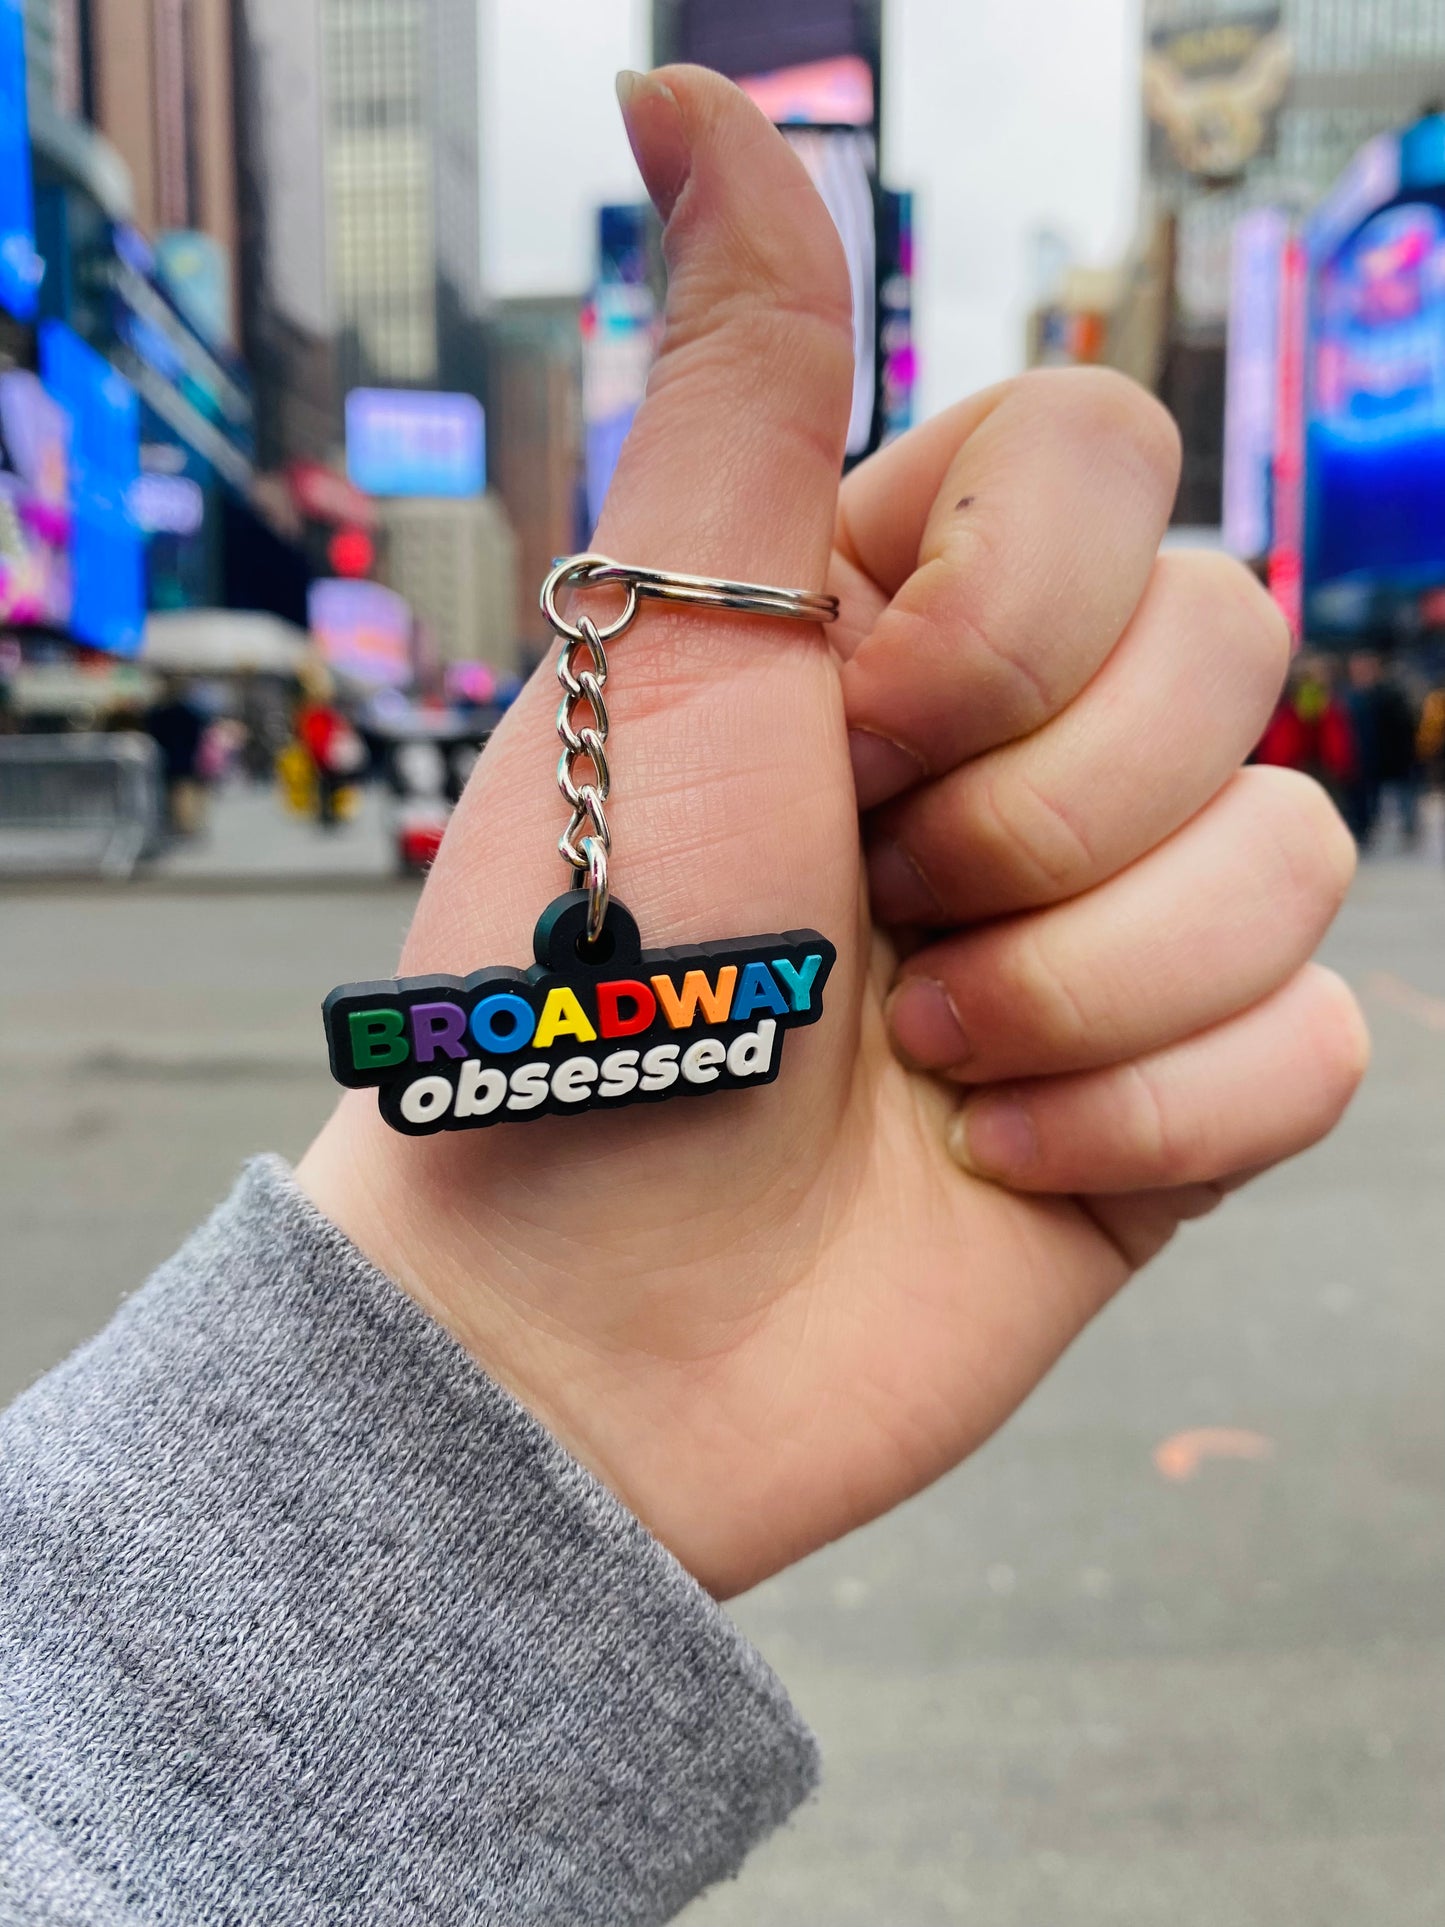 Broadway Obsessed Keychain